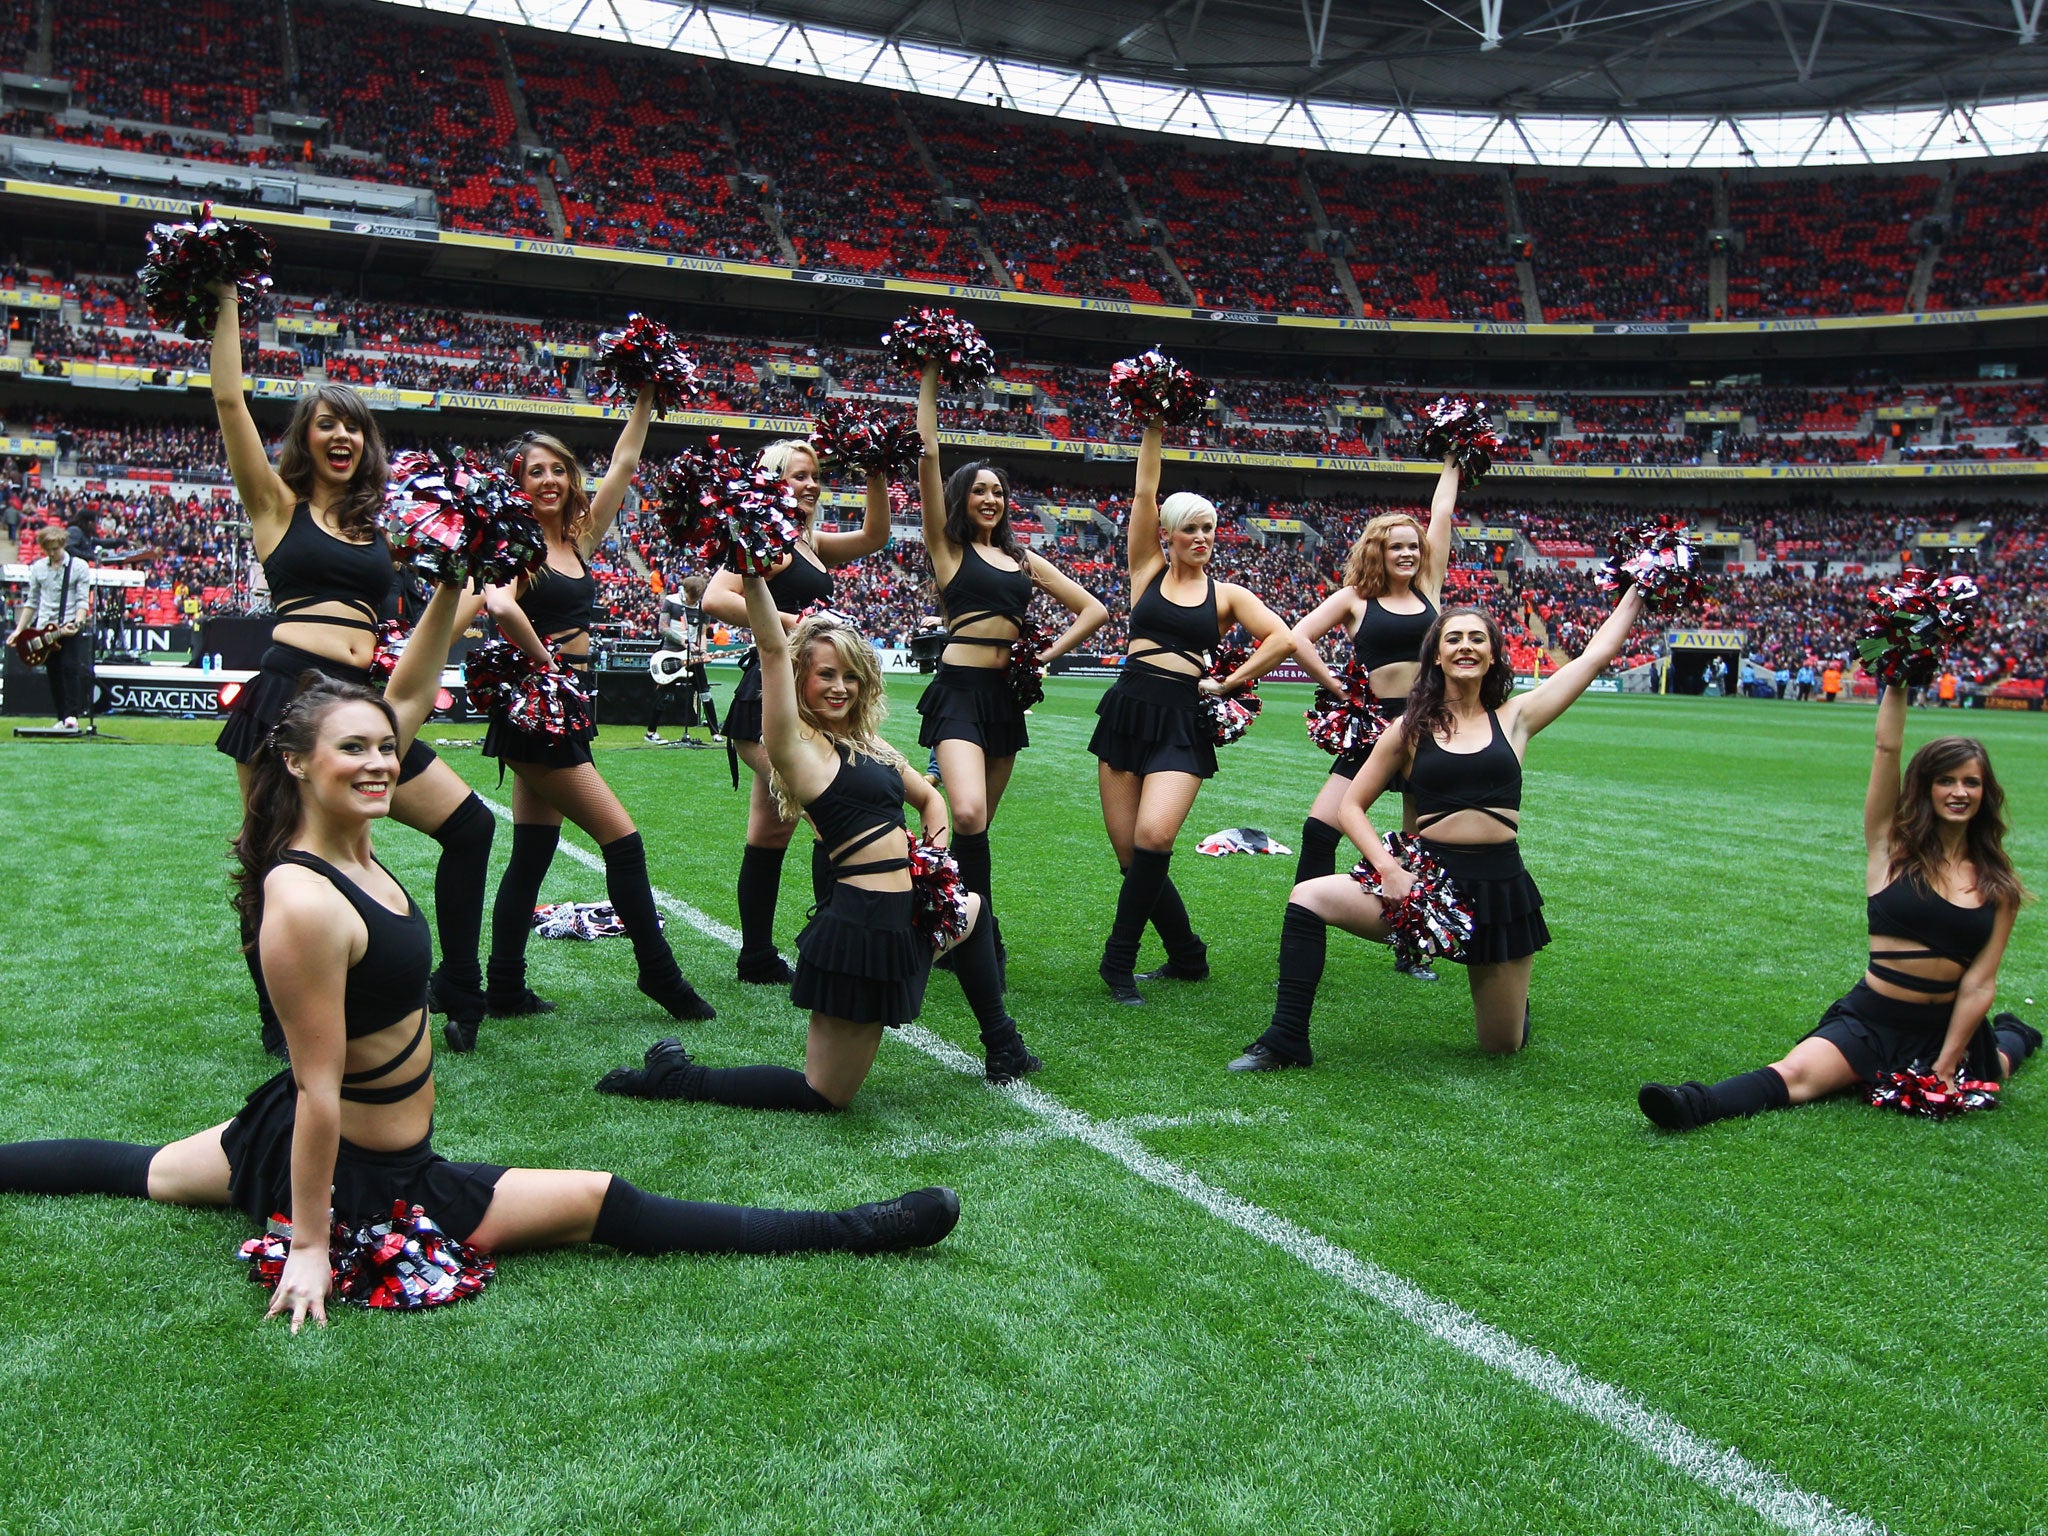 The Saracens Sensations have entertained crowds at half-time for a number of years